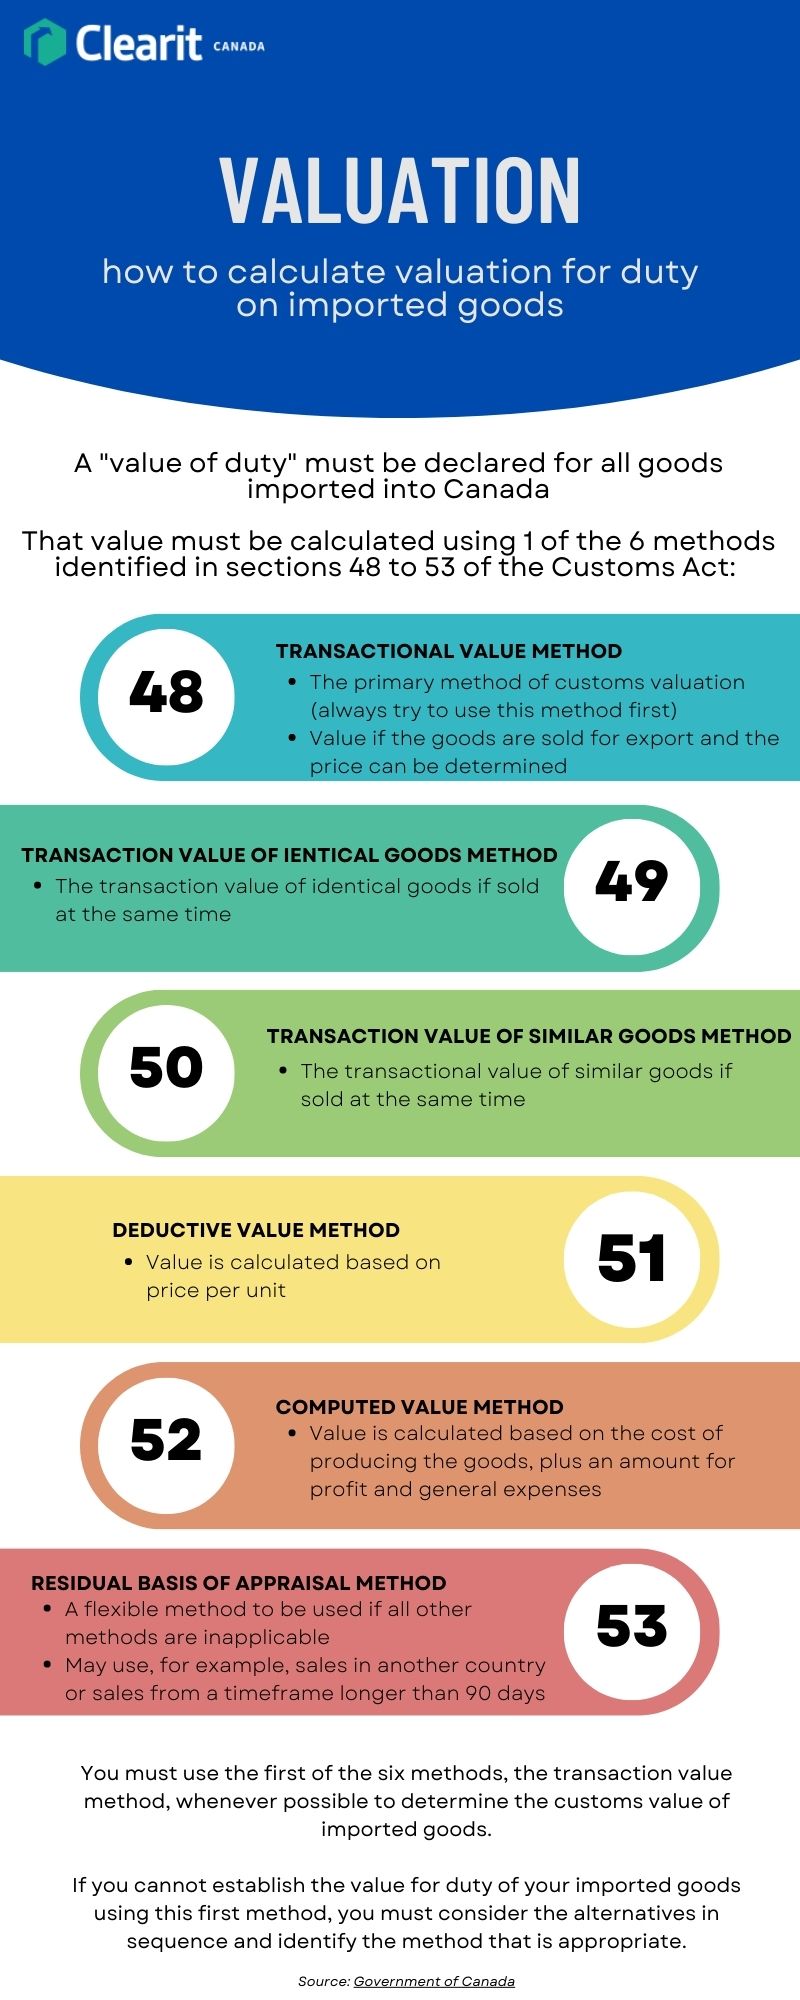 An infographic describing the six methods for calculating valuation for duty on imported goods in Canada as outlined in the Customs Act.